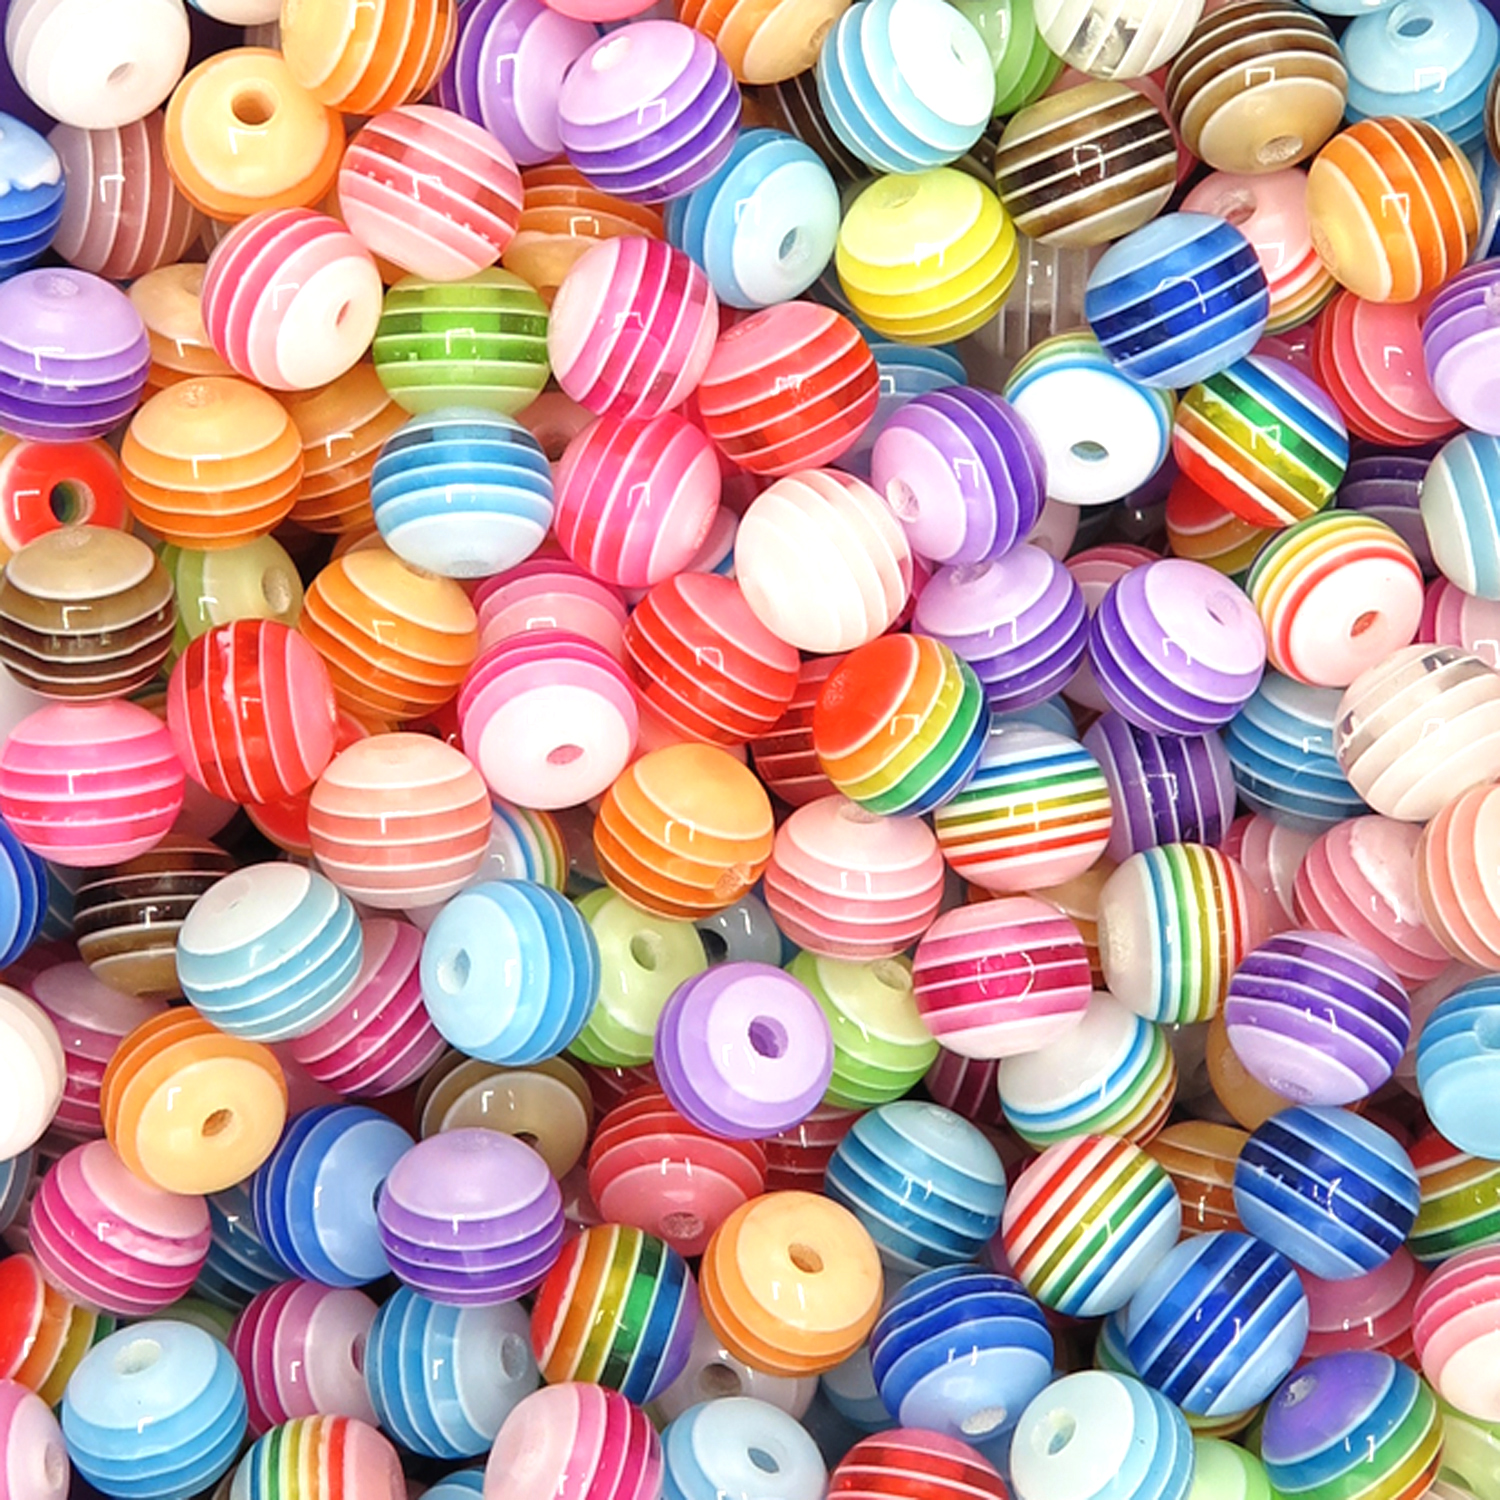 3mm Striped Glass Beads in 10 Colors 1mm Hole Size 650 Pieces Striped Beads  Watermelon Beads Rainbow Stripe Beads Christmas Bead 